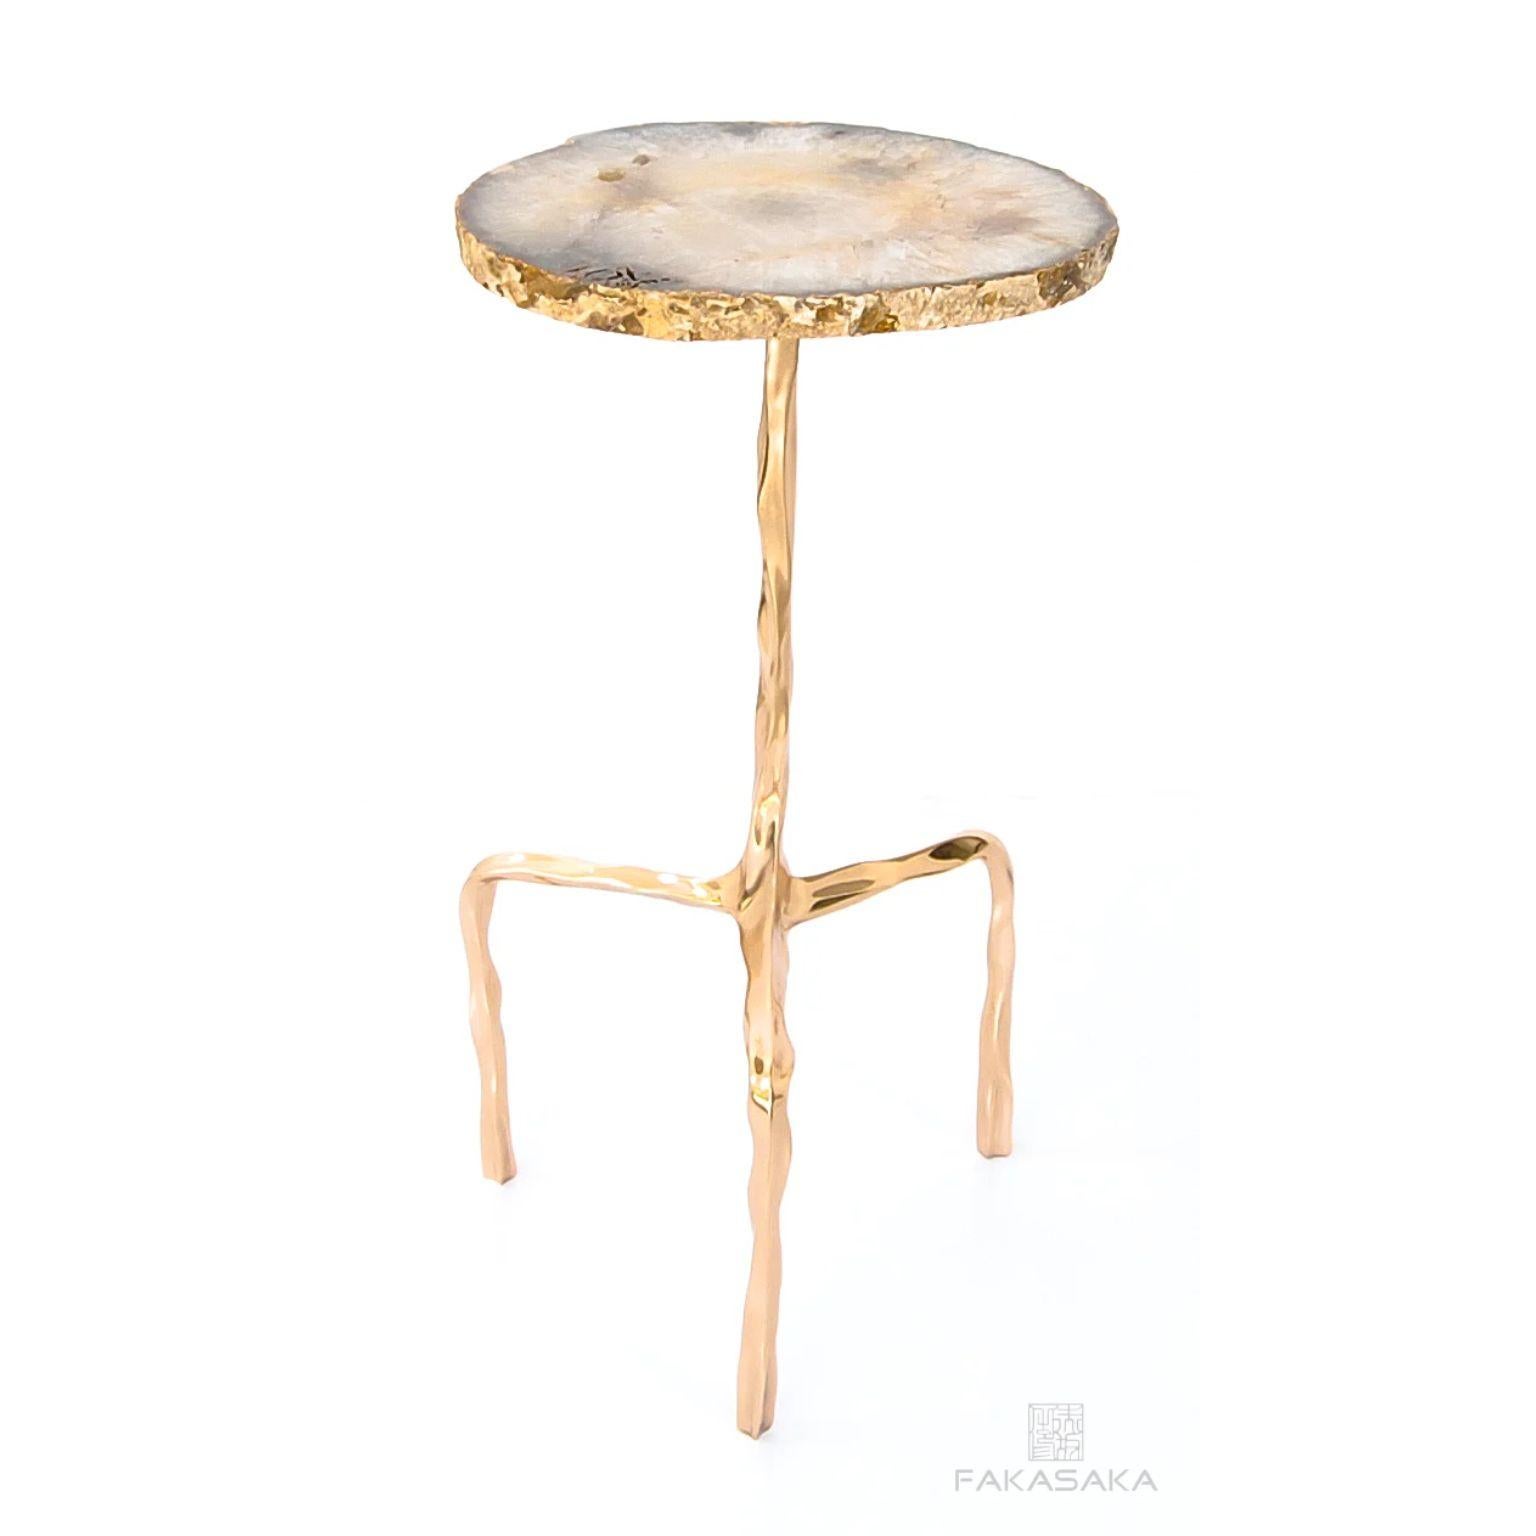 Aretha drink table with Agate top by Fakasaka Design.
Dimensions: W 30 cm D 30 cm H 58 cm.
Materials: polished bronze base, Agate top.
 
Also available in different table top materials:
Nero Marquina Marble 
Marrom Imperial Marble
Pedra